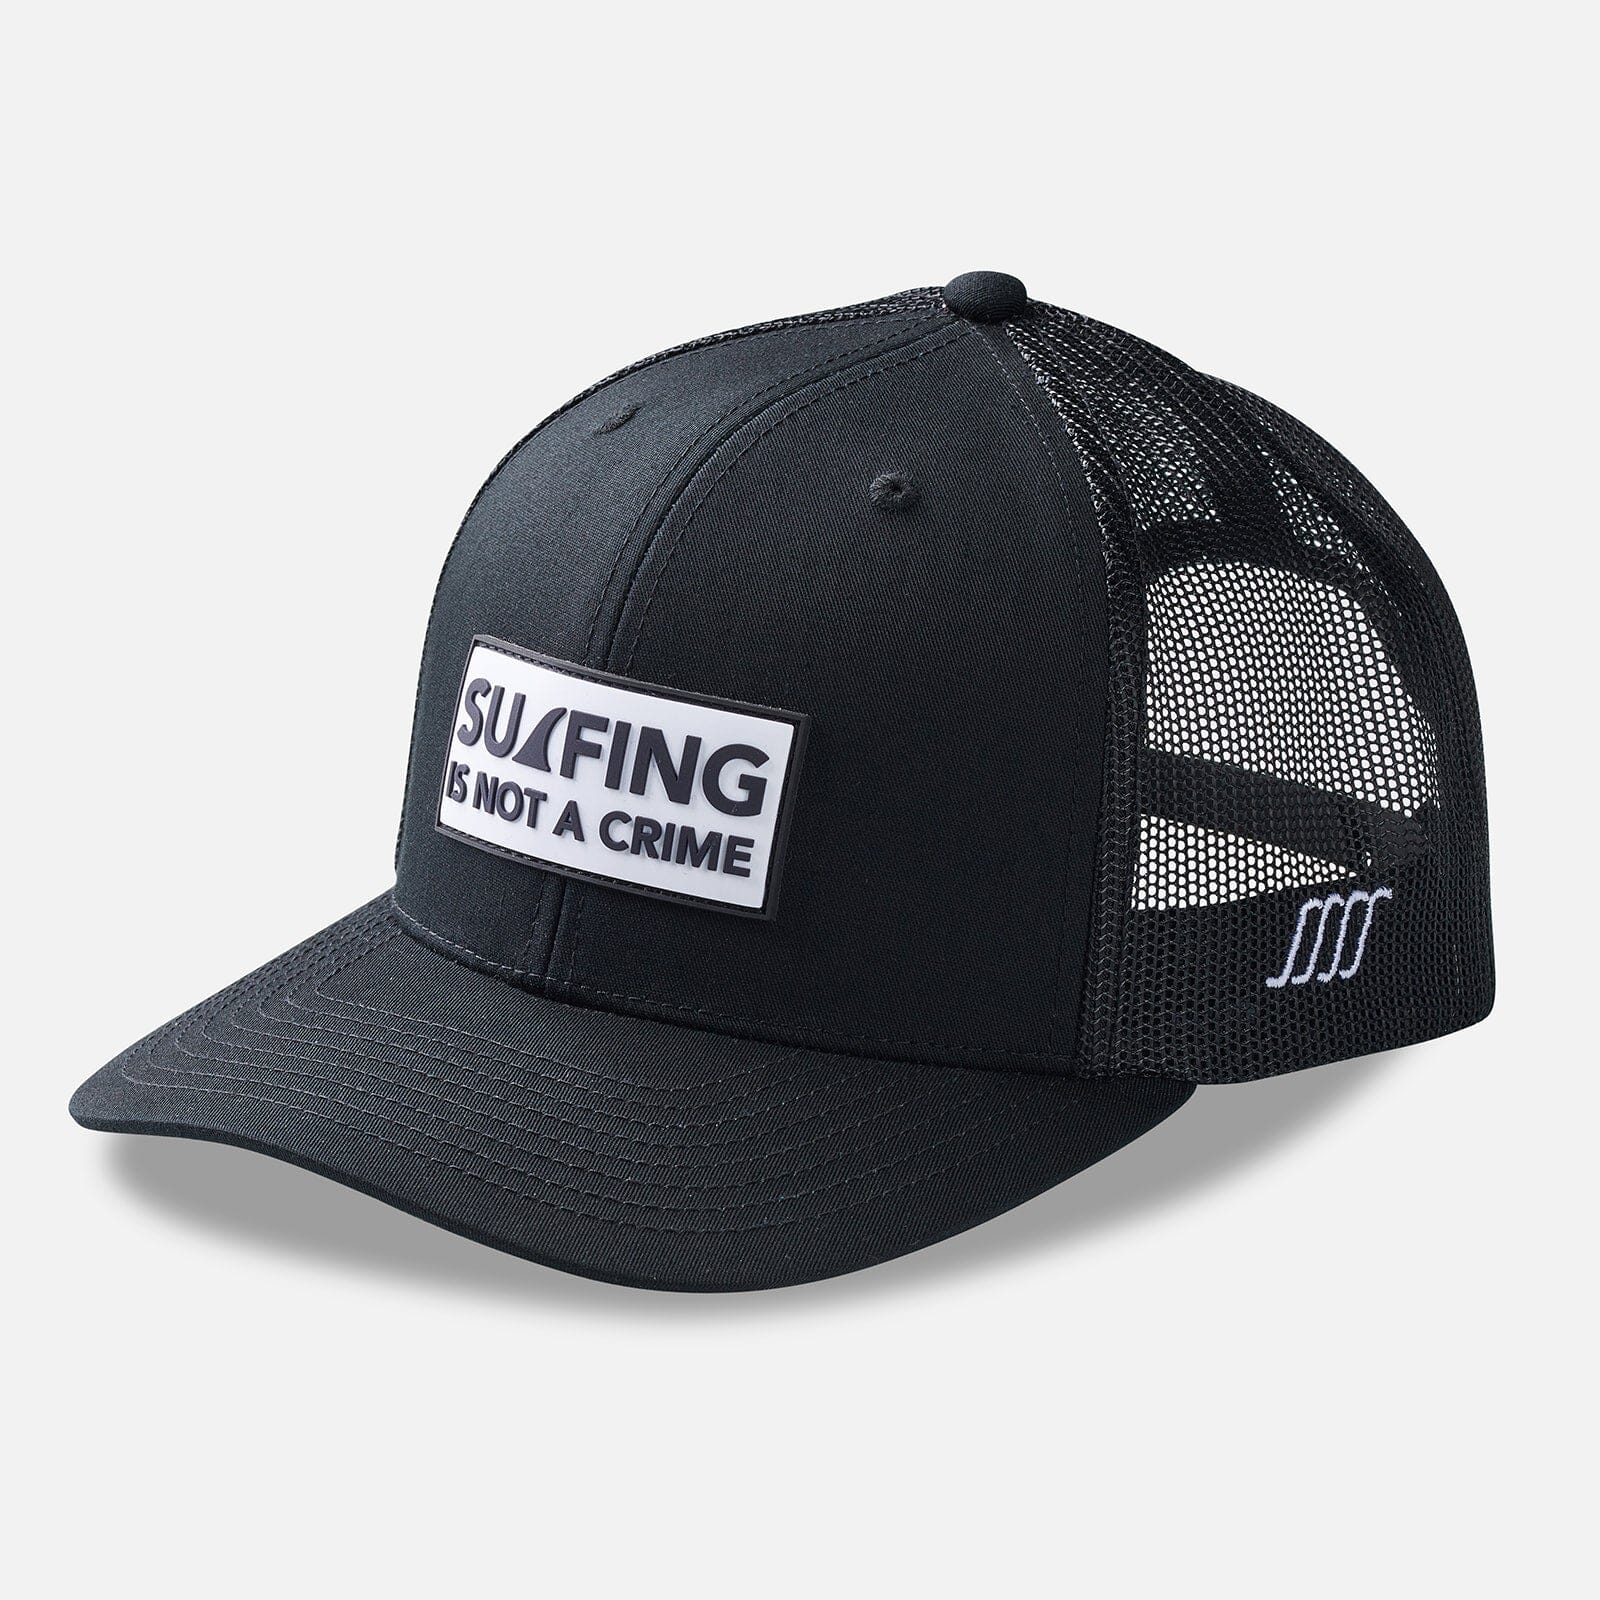 SOUTH SWELL Surfing is Not a Crime Trucker Hat Hats SOUTH SWELL 